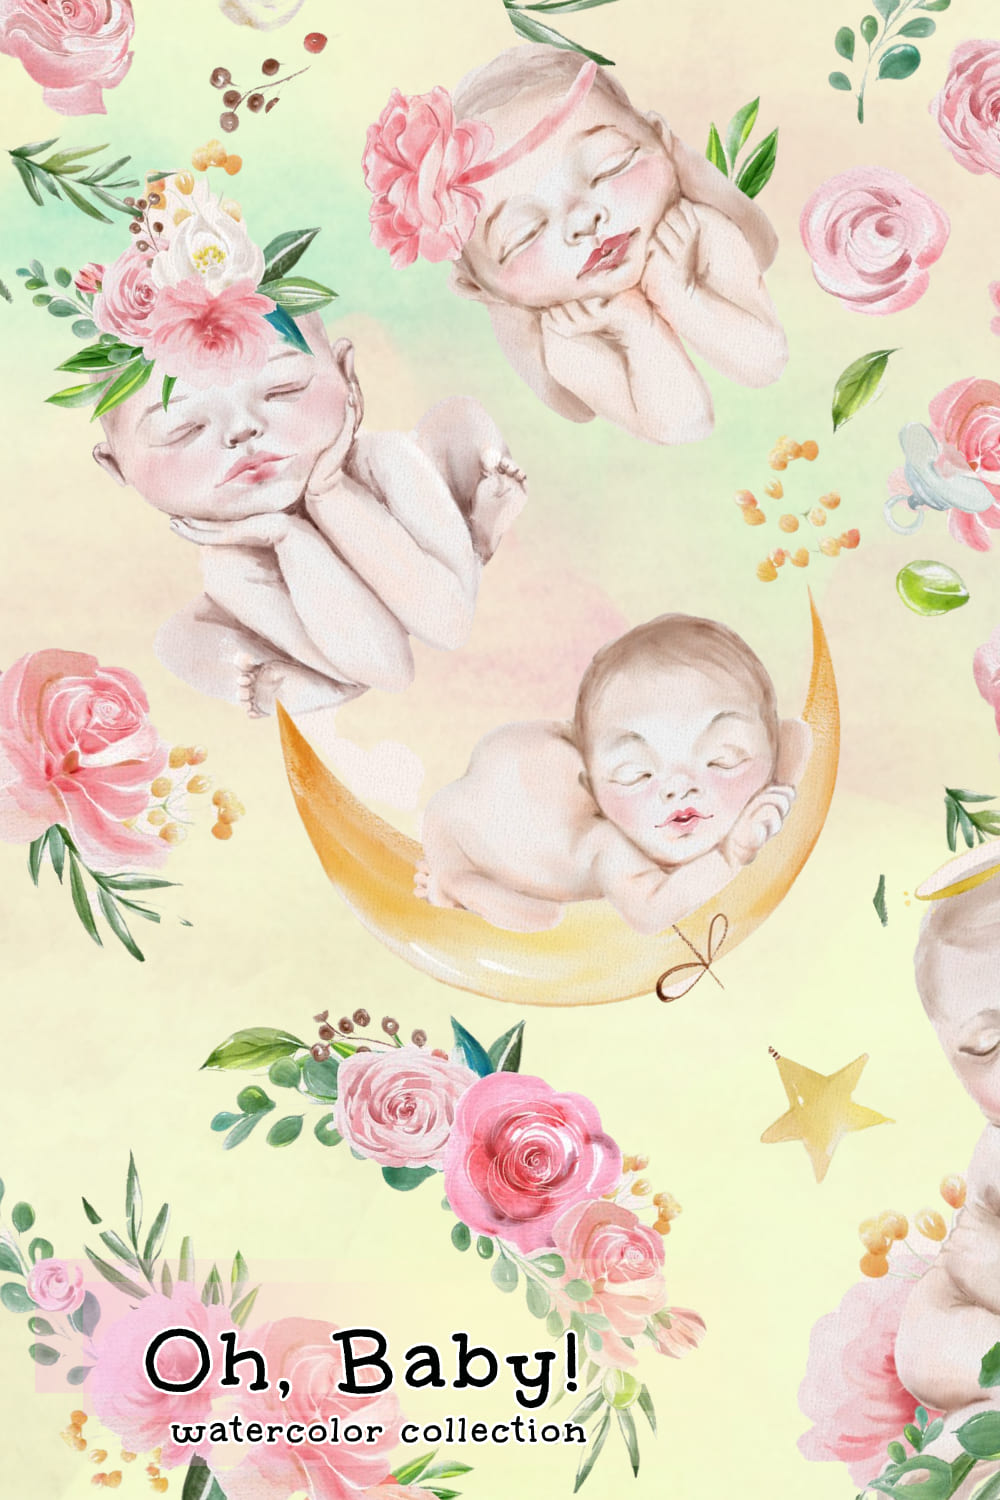 Oh, Baby! Watercolor Collection - Pinterest Image Preview.